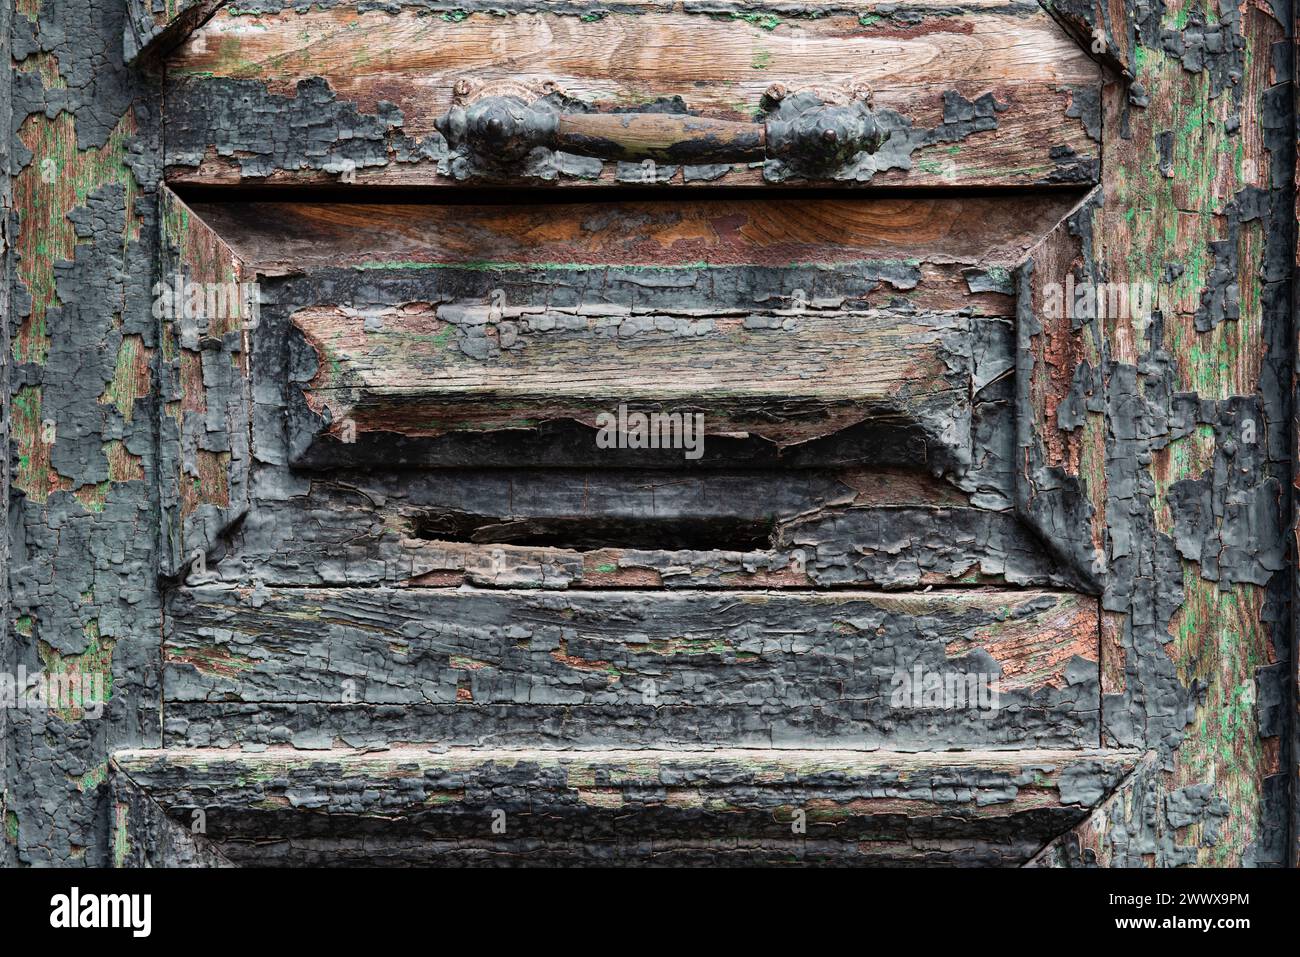 Abstract detail of a colorful, cracked and peeling wooden doorway in the Old Town historic neighborhood of Tbilisi, capital of the Republic of Georgia Stock Photo